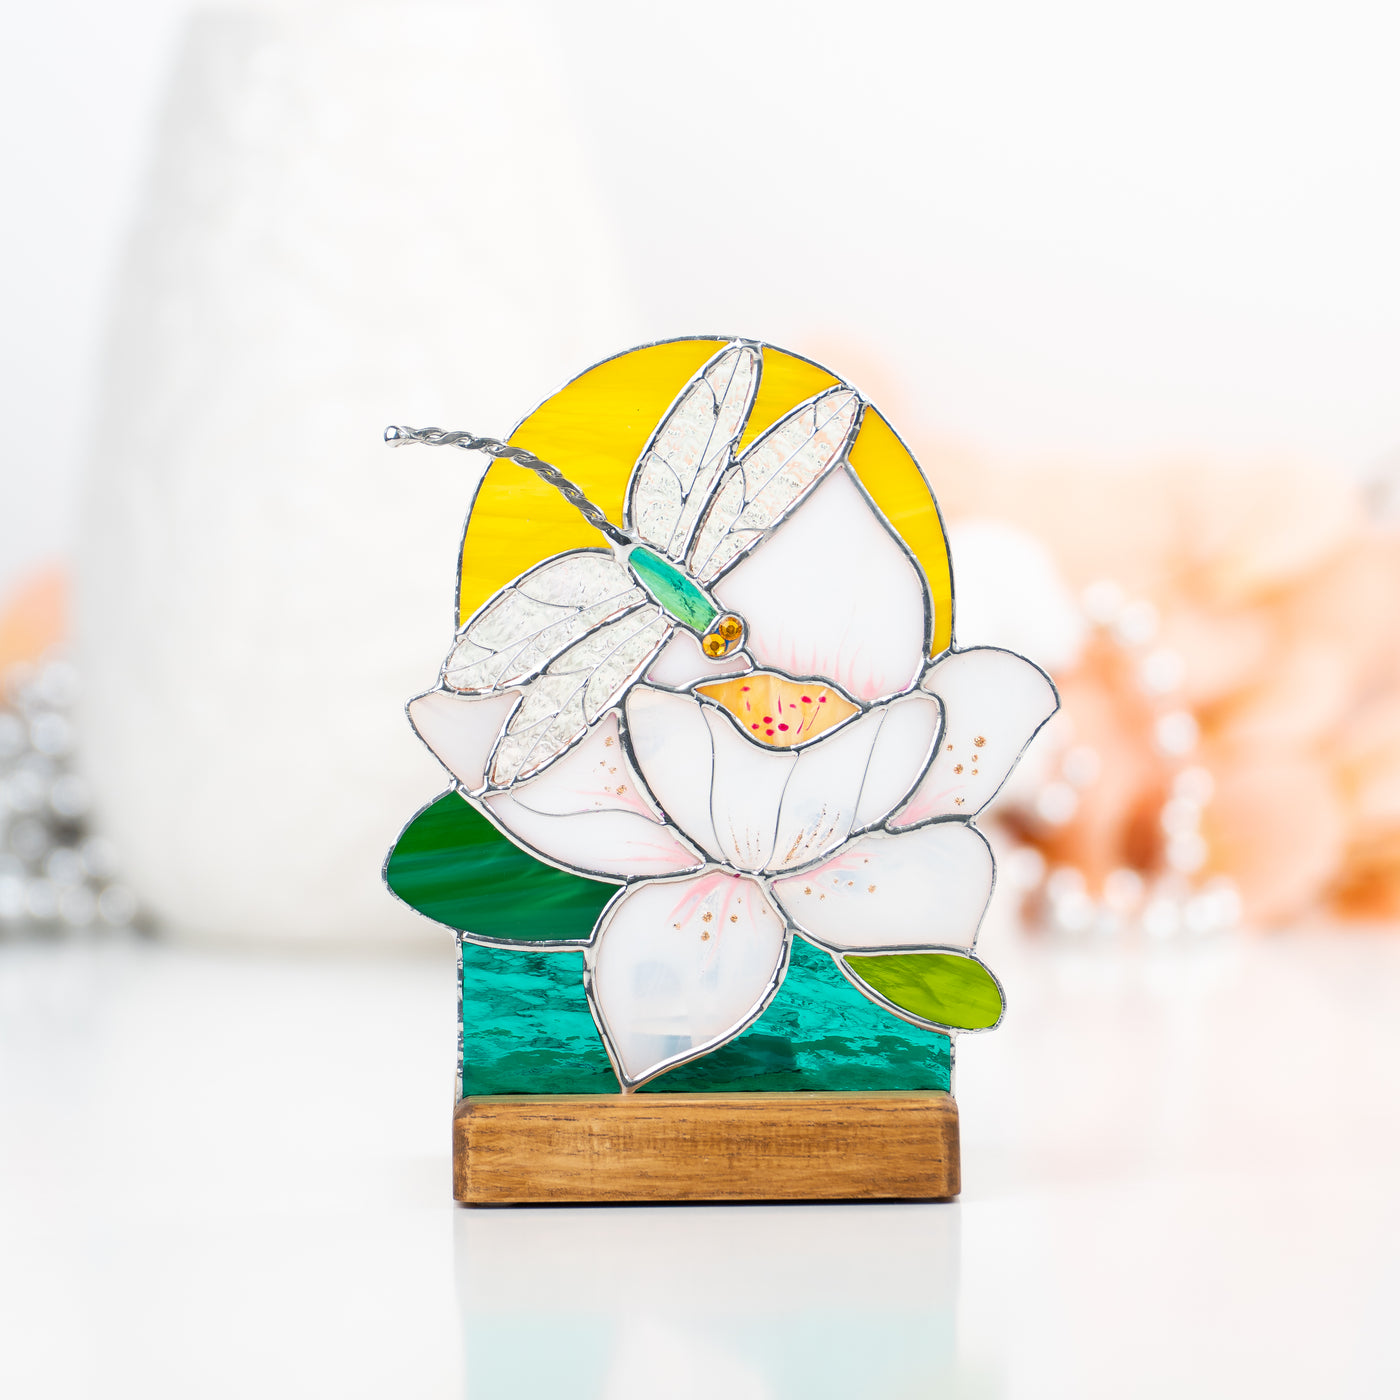 Stained glass panel in a wooden base lit by candle depicting dragonfly with the flower